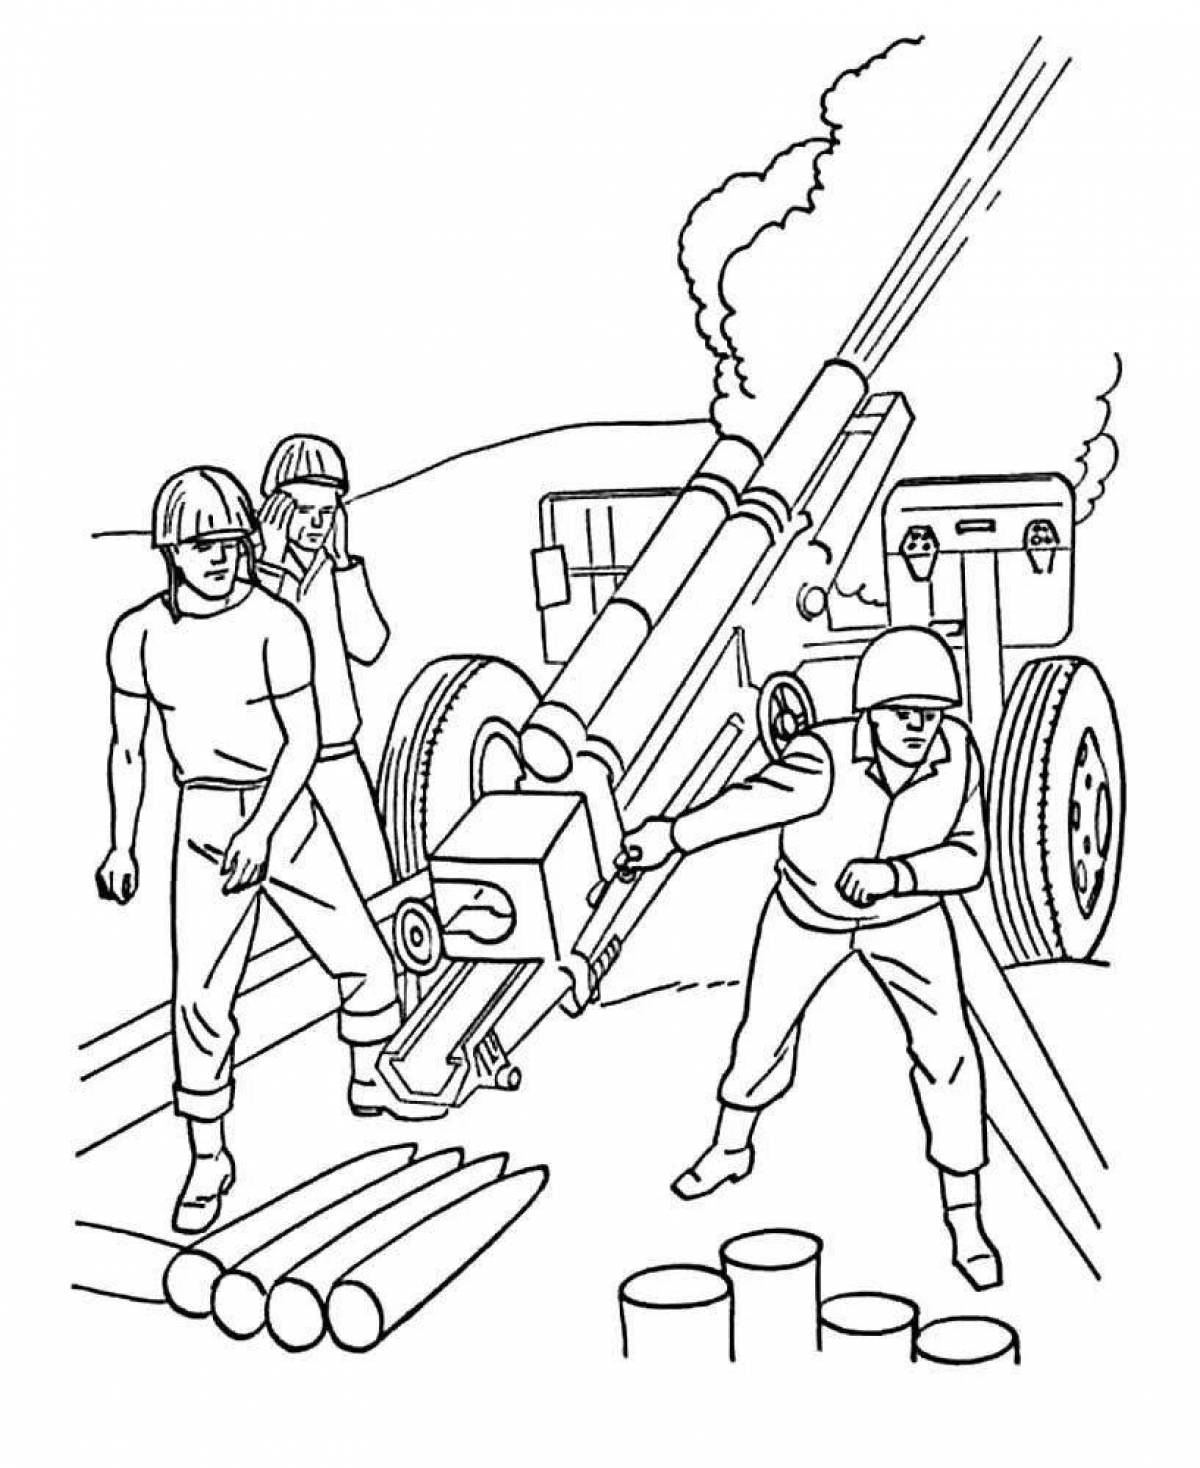 Fun military profession coloring book for kids